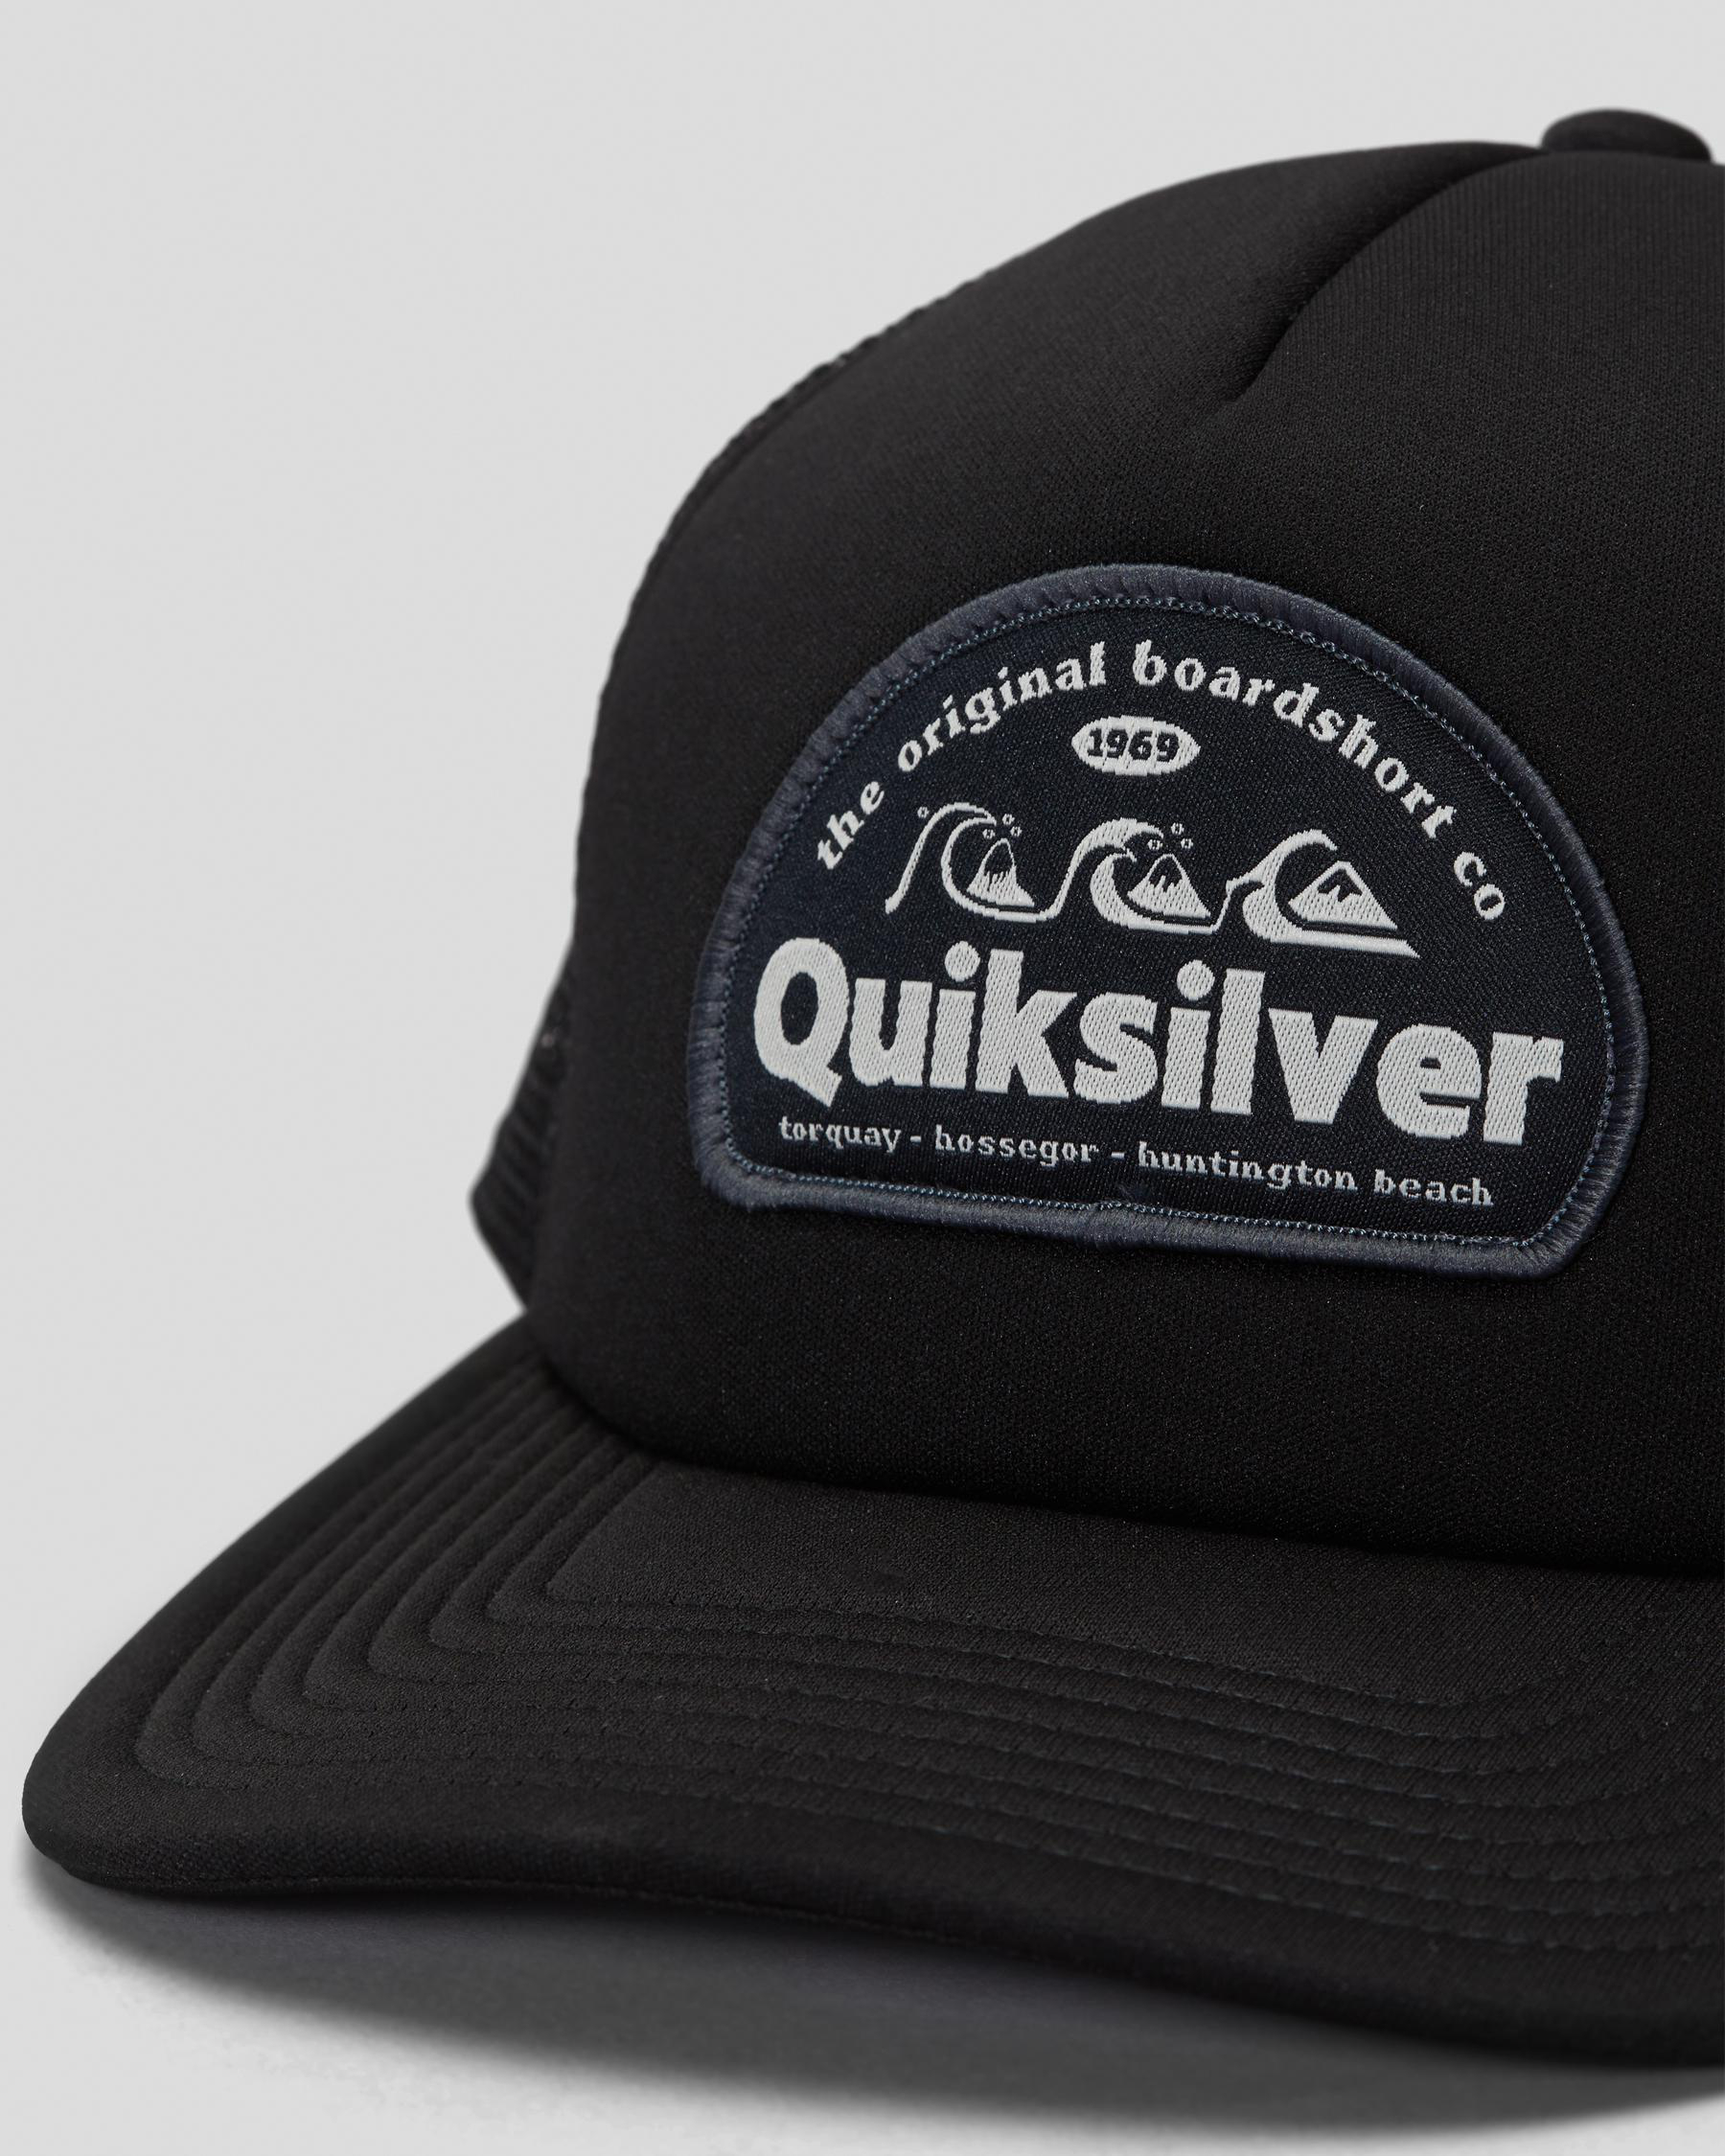 Quiksilver Onshore Youth Trucker Cap In Black - FREE* Shipping & Easy  Returns - City Beach United States